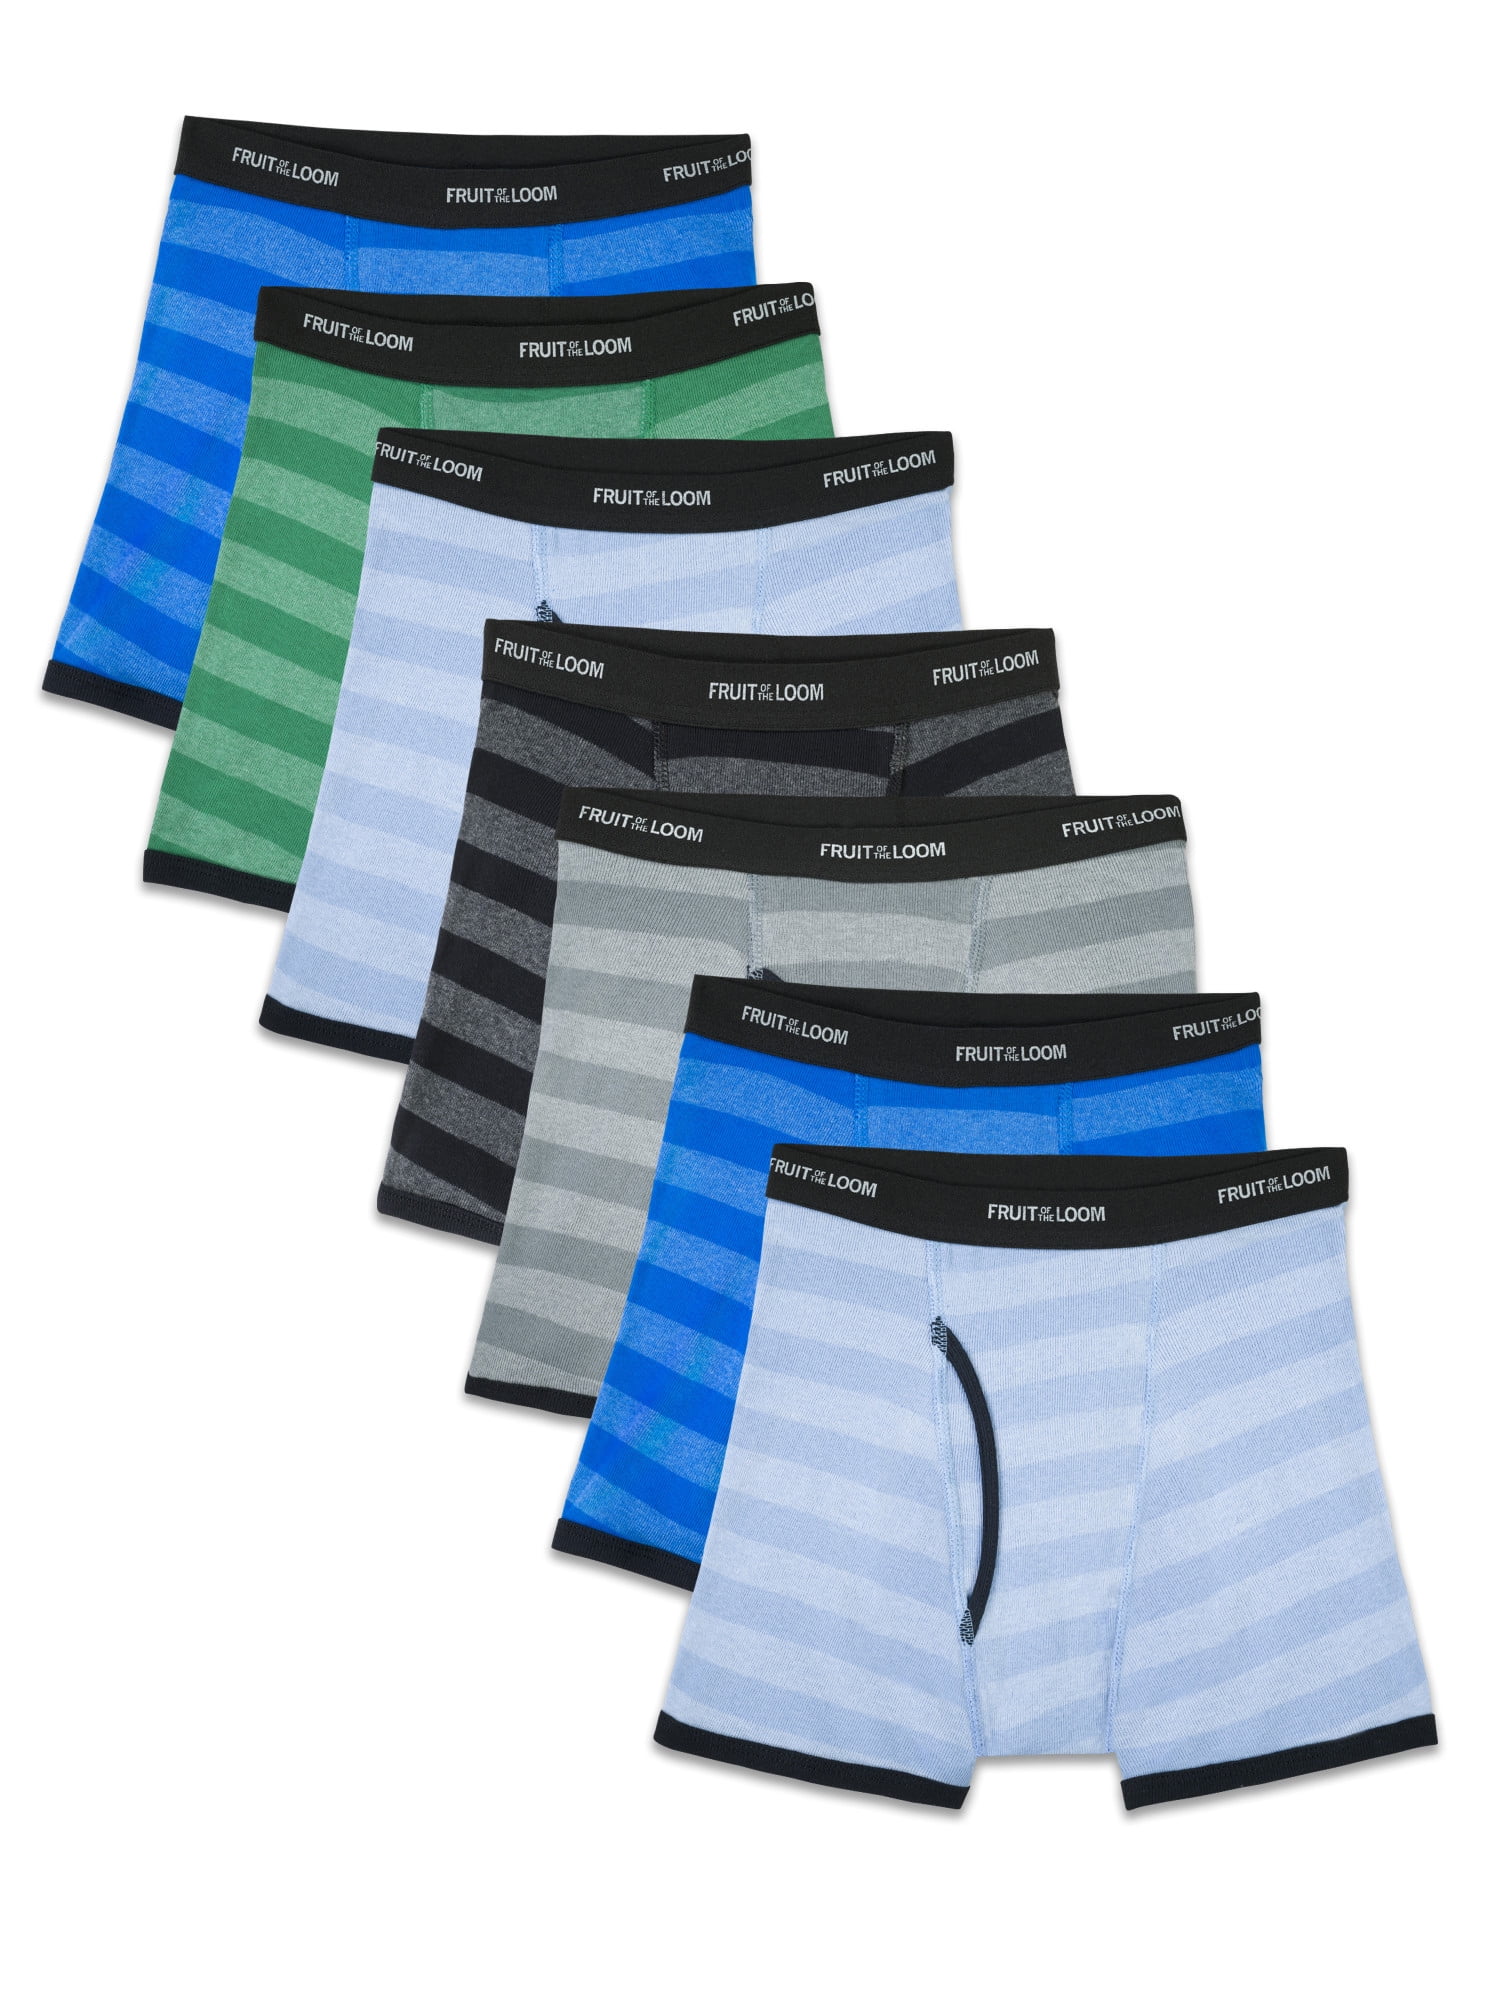 Fruit of the Loom Toddler Boy Cotton Boxer Briefs, 10 Pack